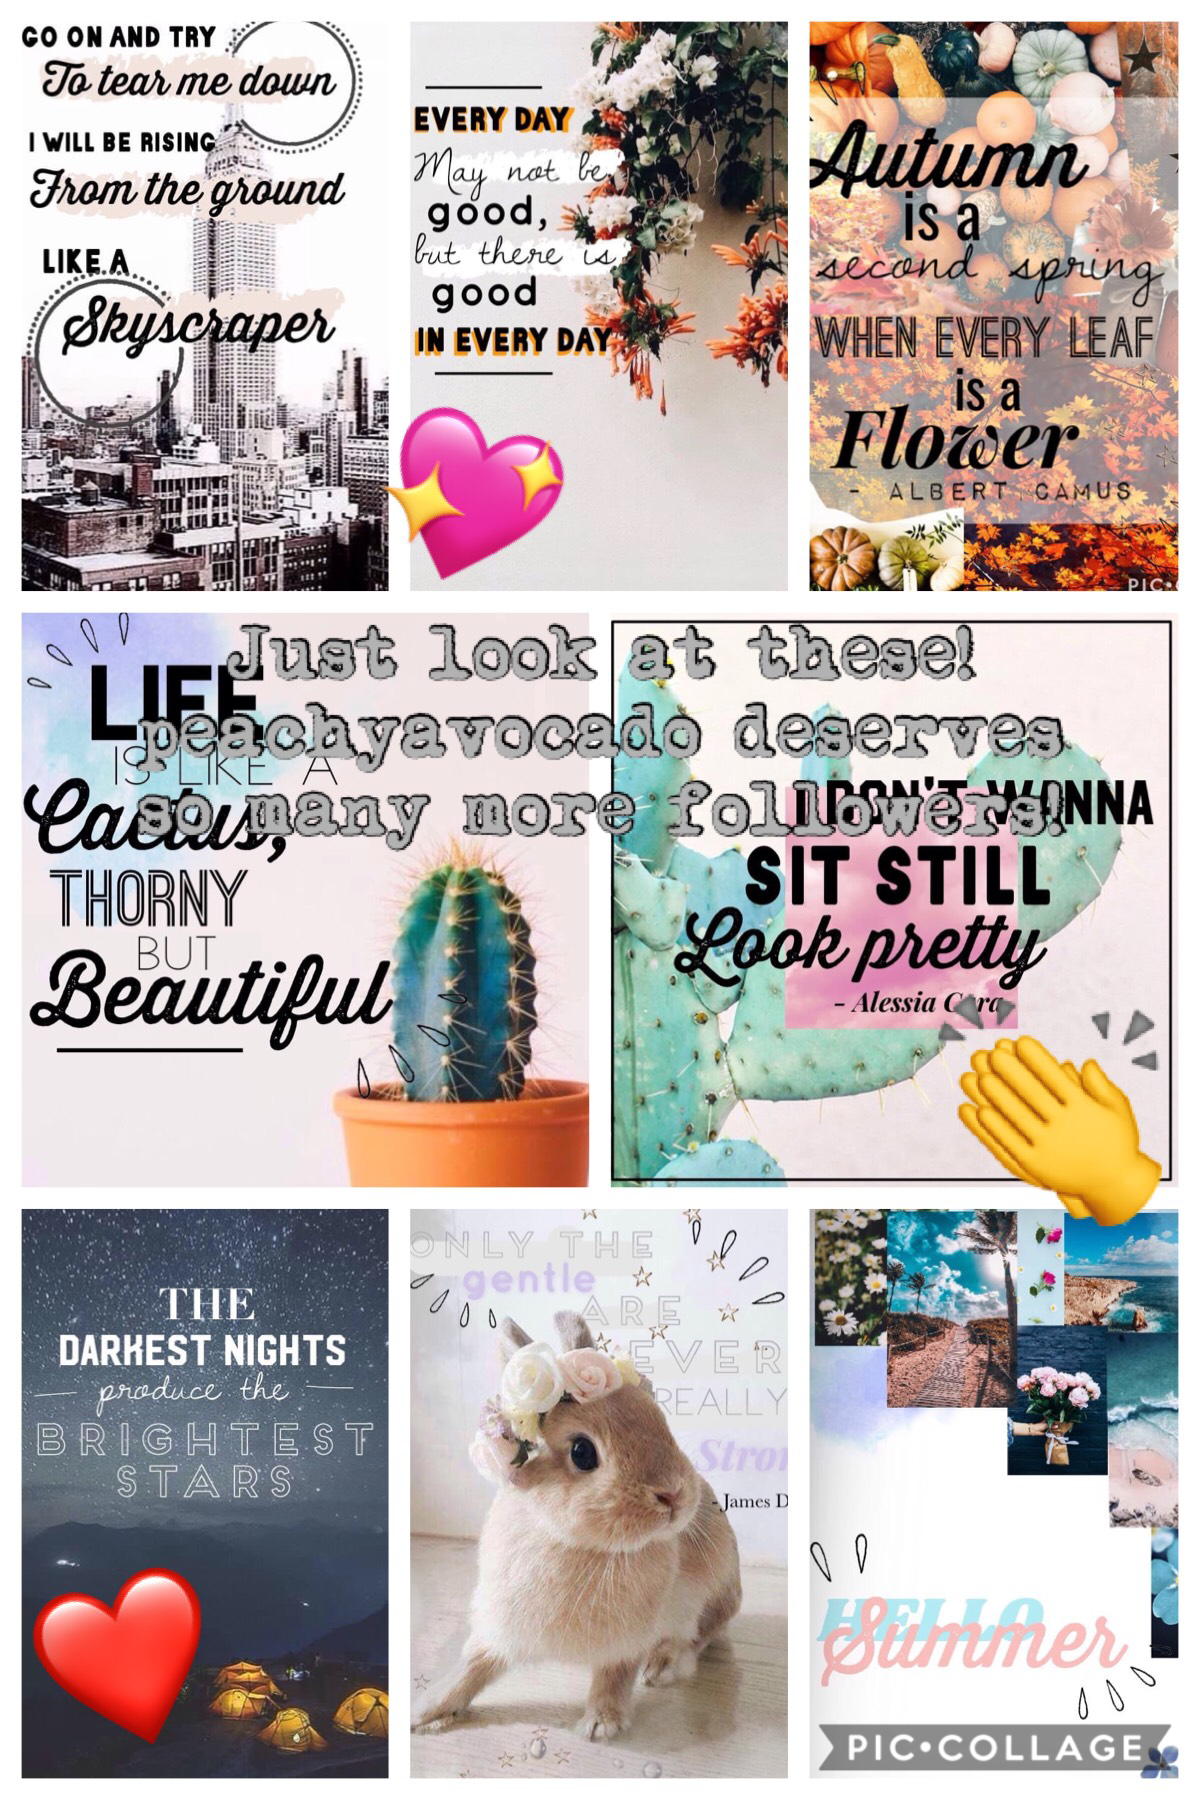 These collages are soooo BEAUTIFUL! ❤️❤️❤️ Peachyavocado deserves so many more followers! Let’s help her get to 5️⃣0️⃣0️⃣